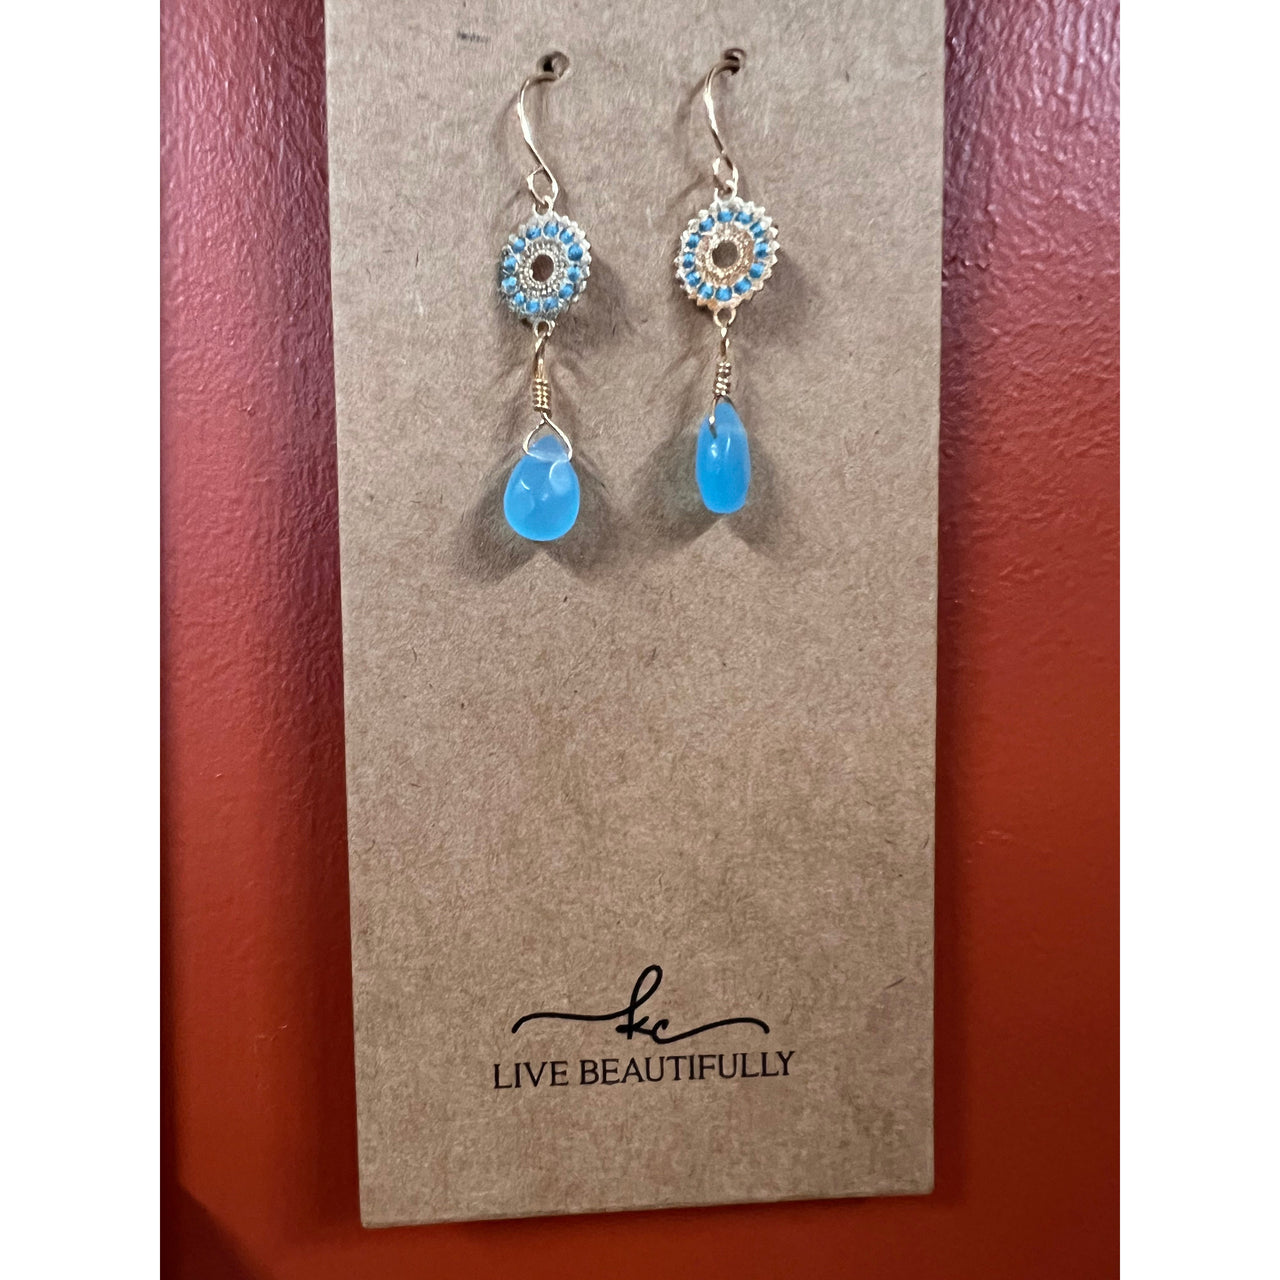 Live Beautifully Earrings - Drop Turquoise Stone